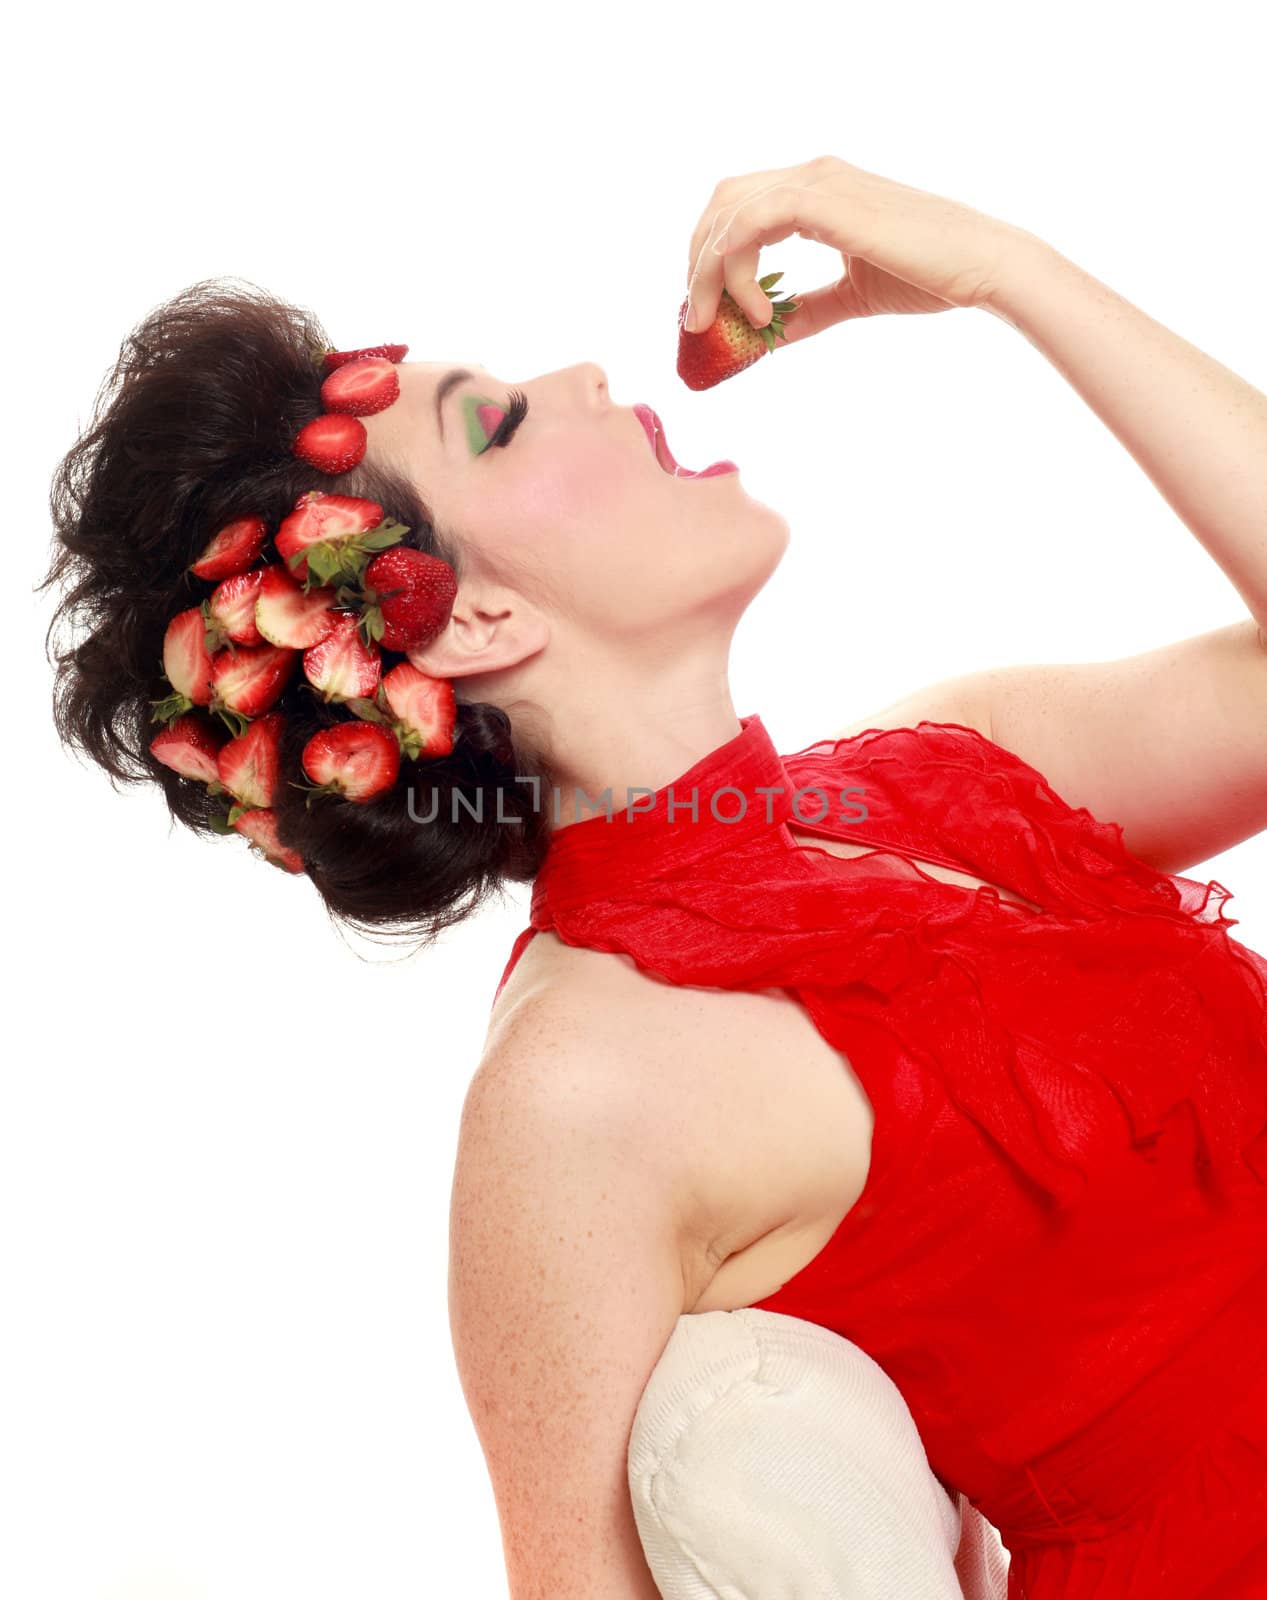 Woman With Strawberries in her Hair on White Background